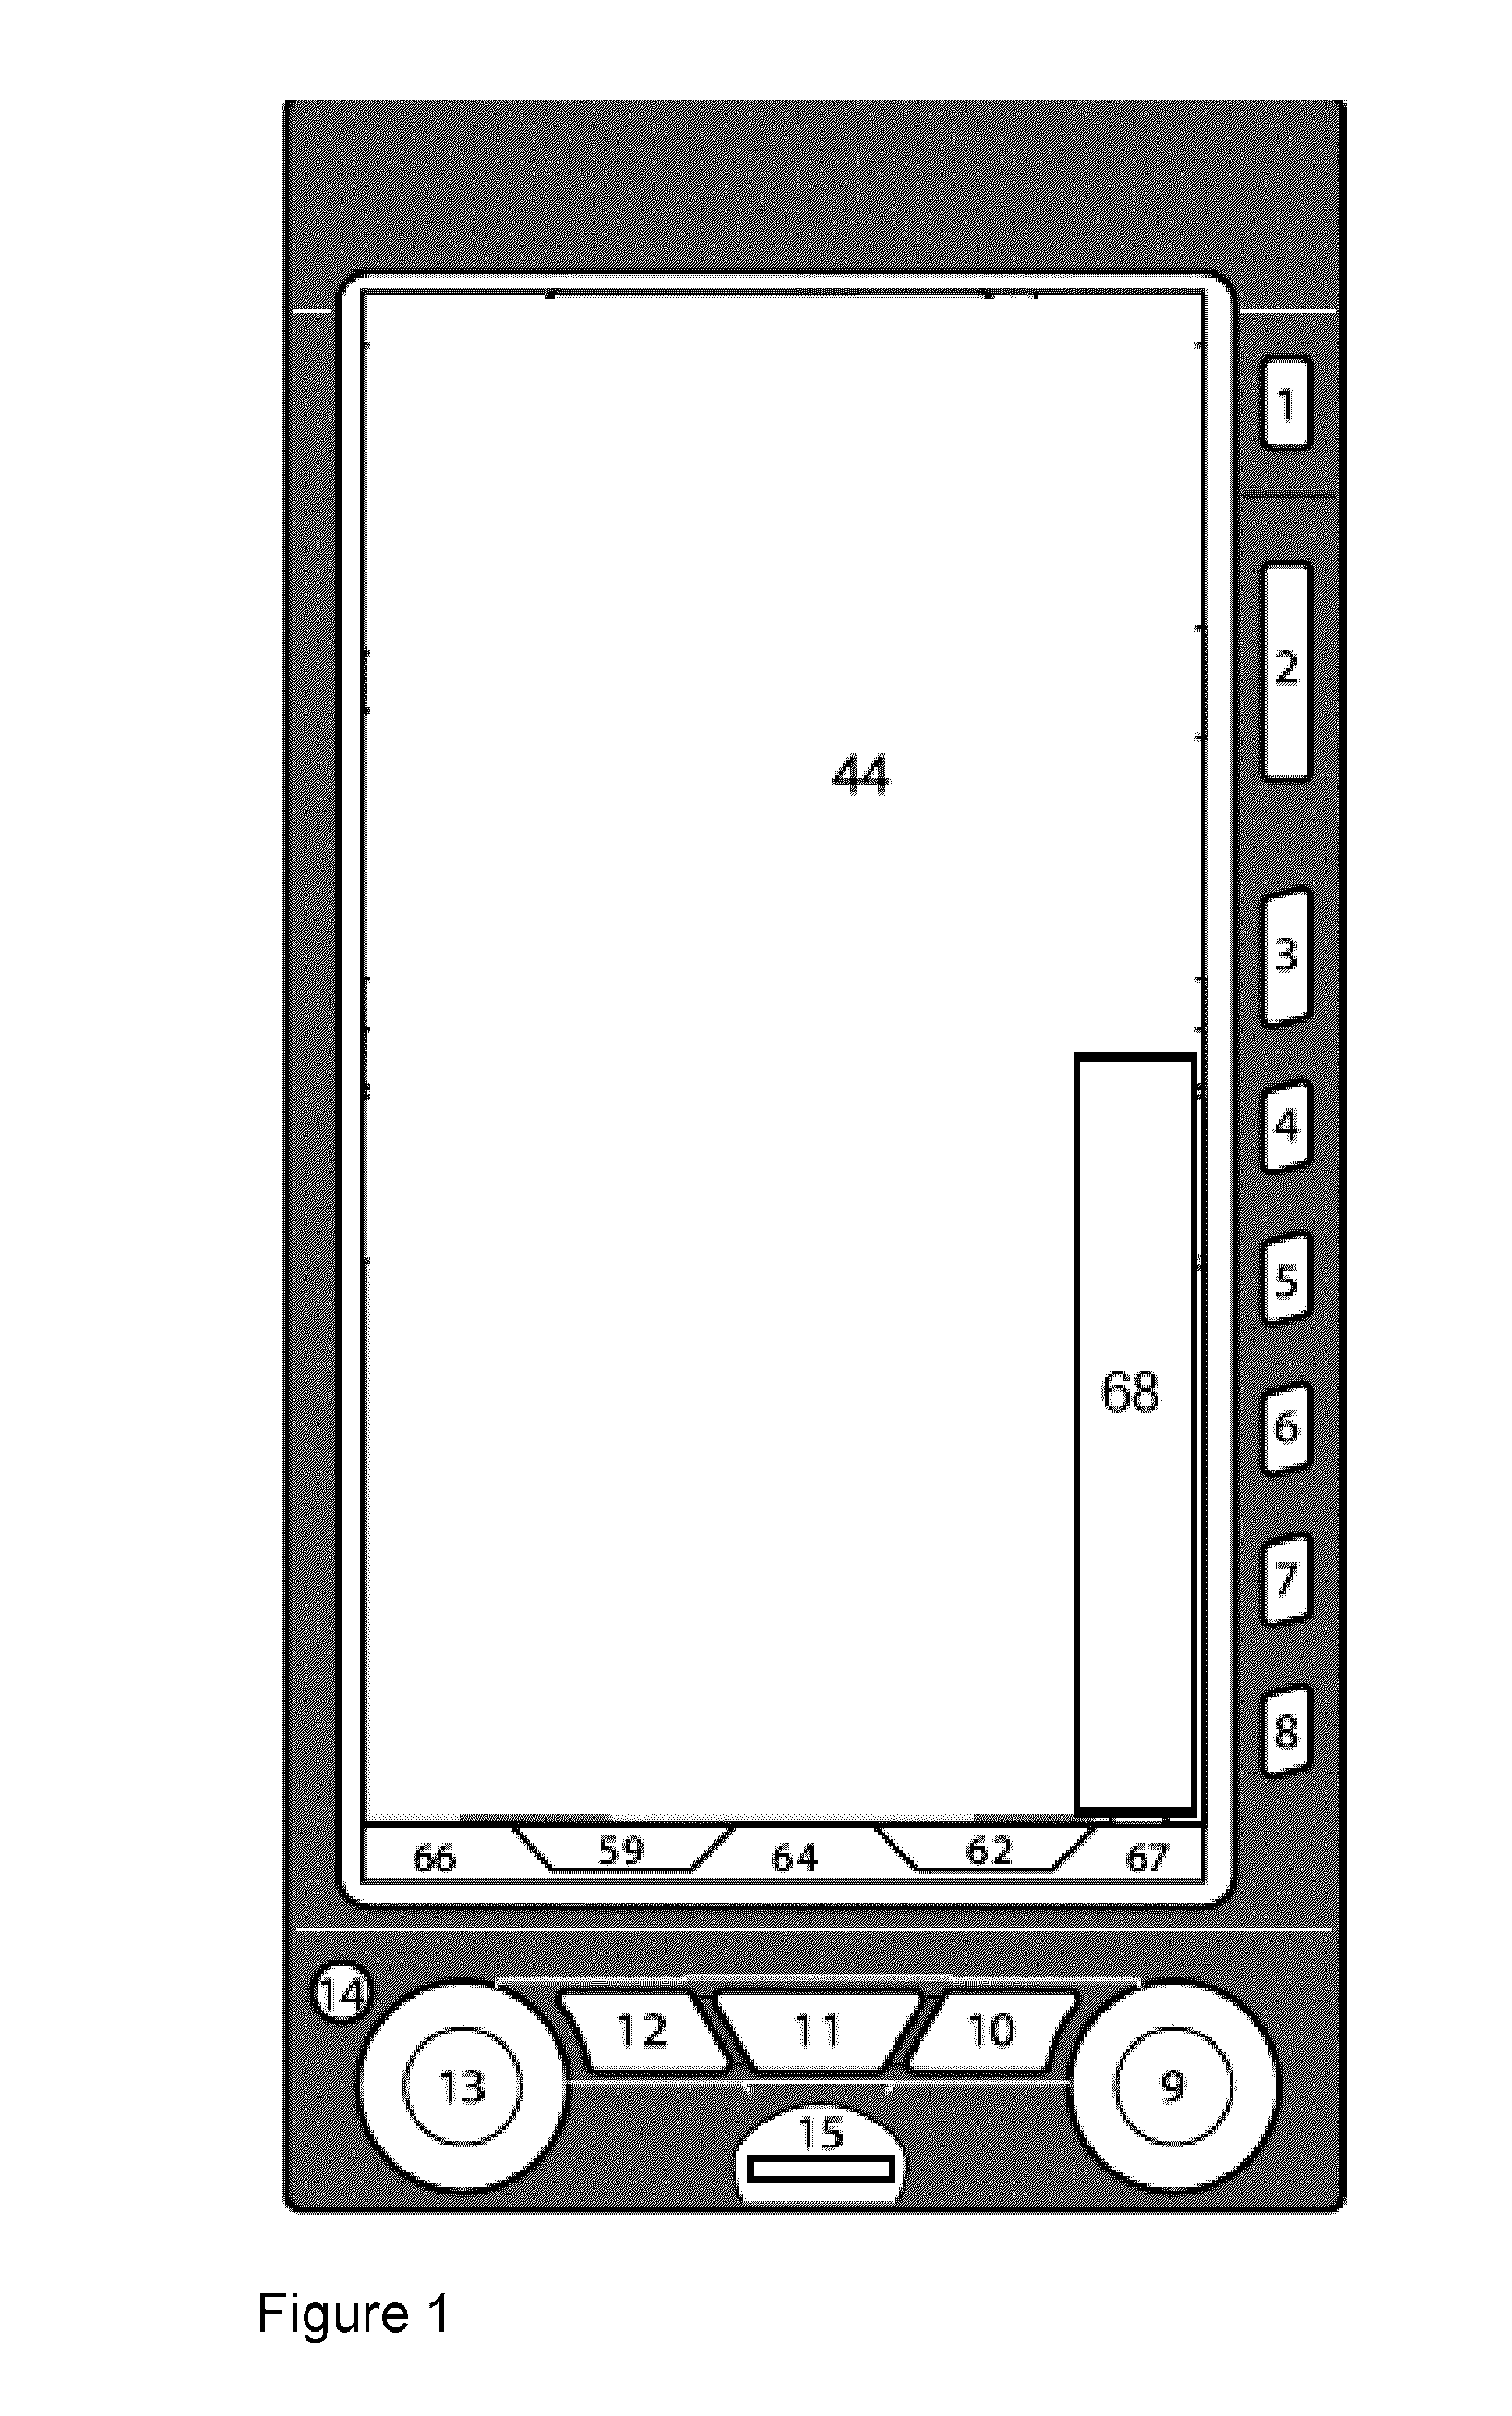 Avionics device, systems and methods of display